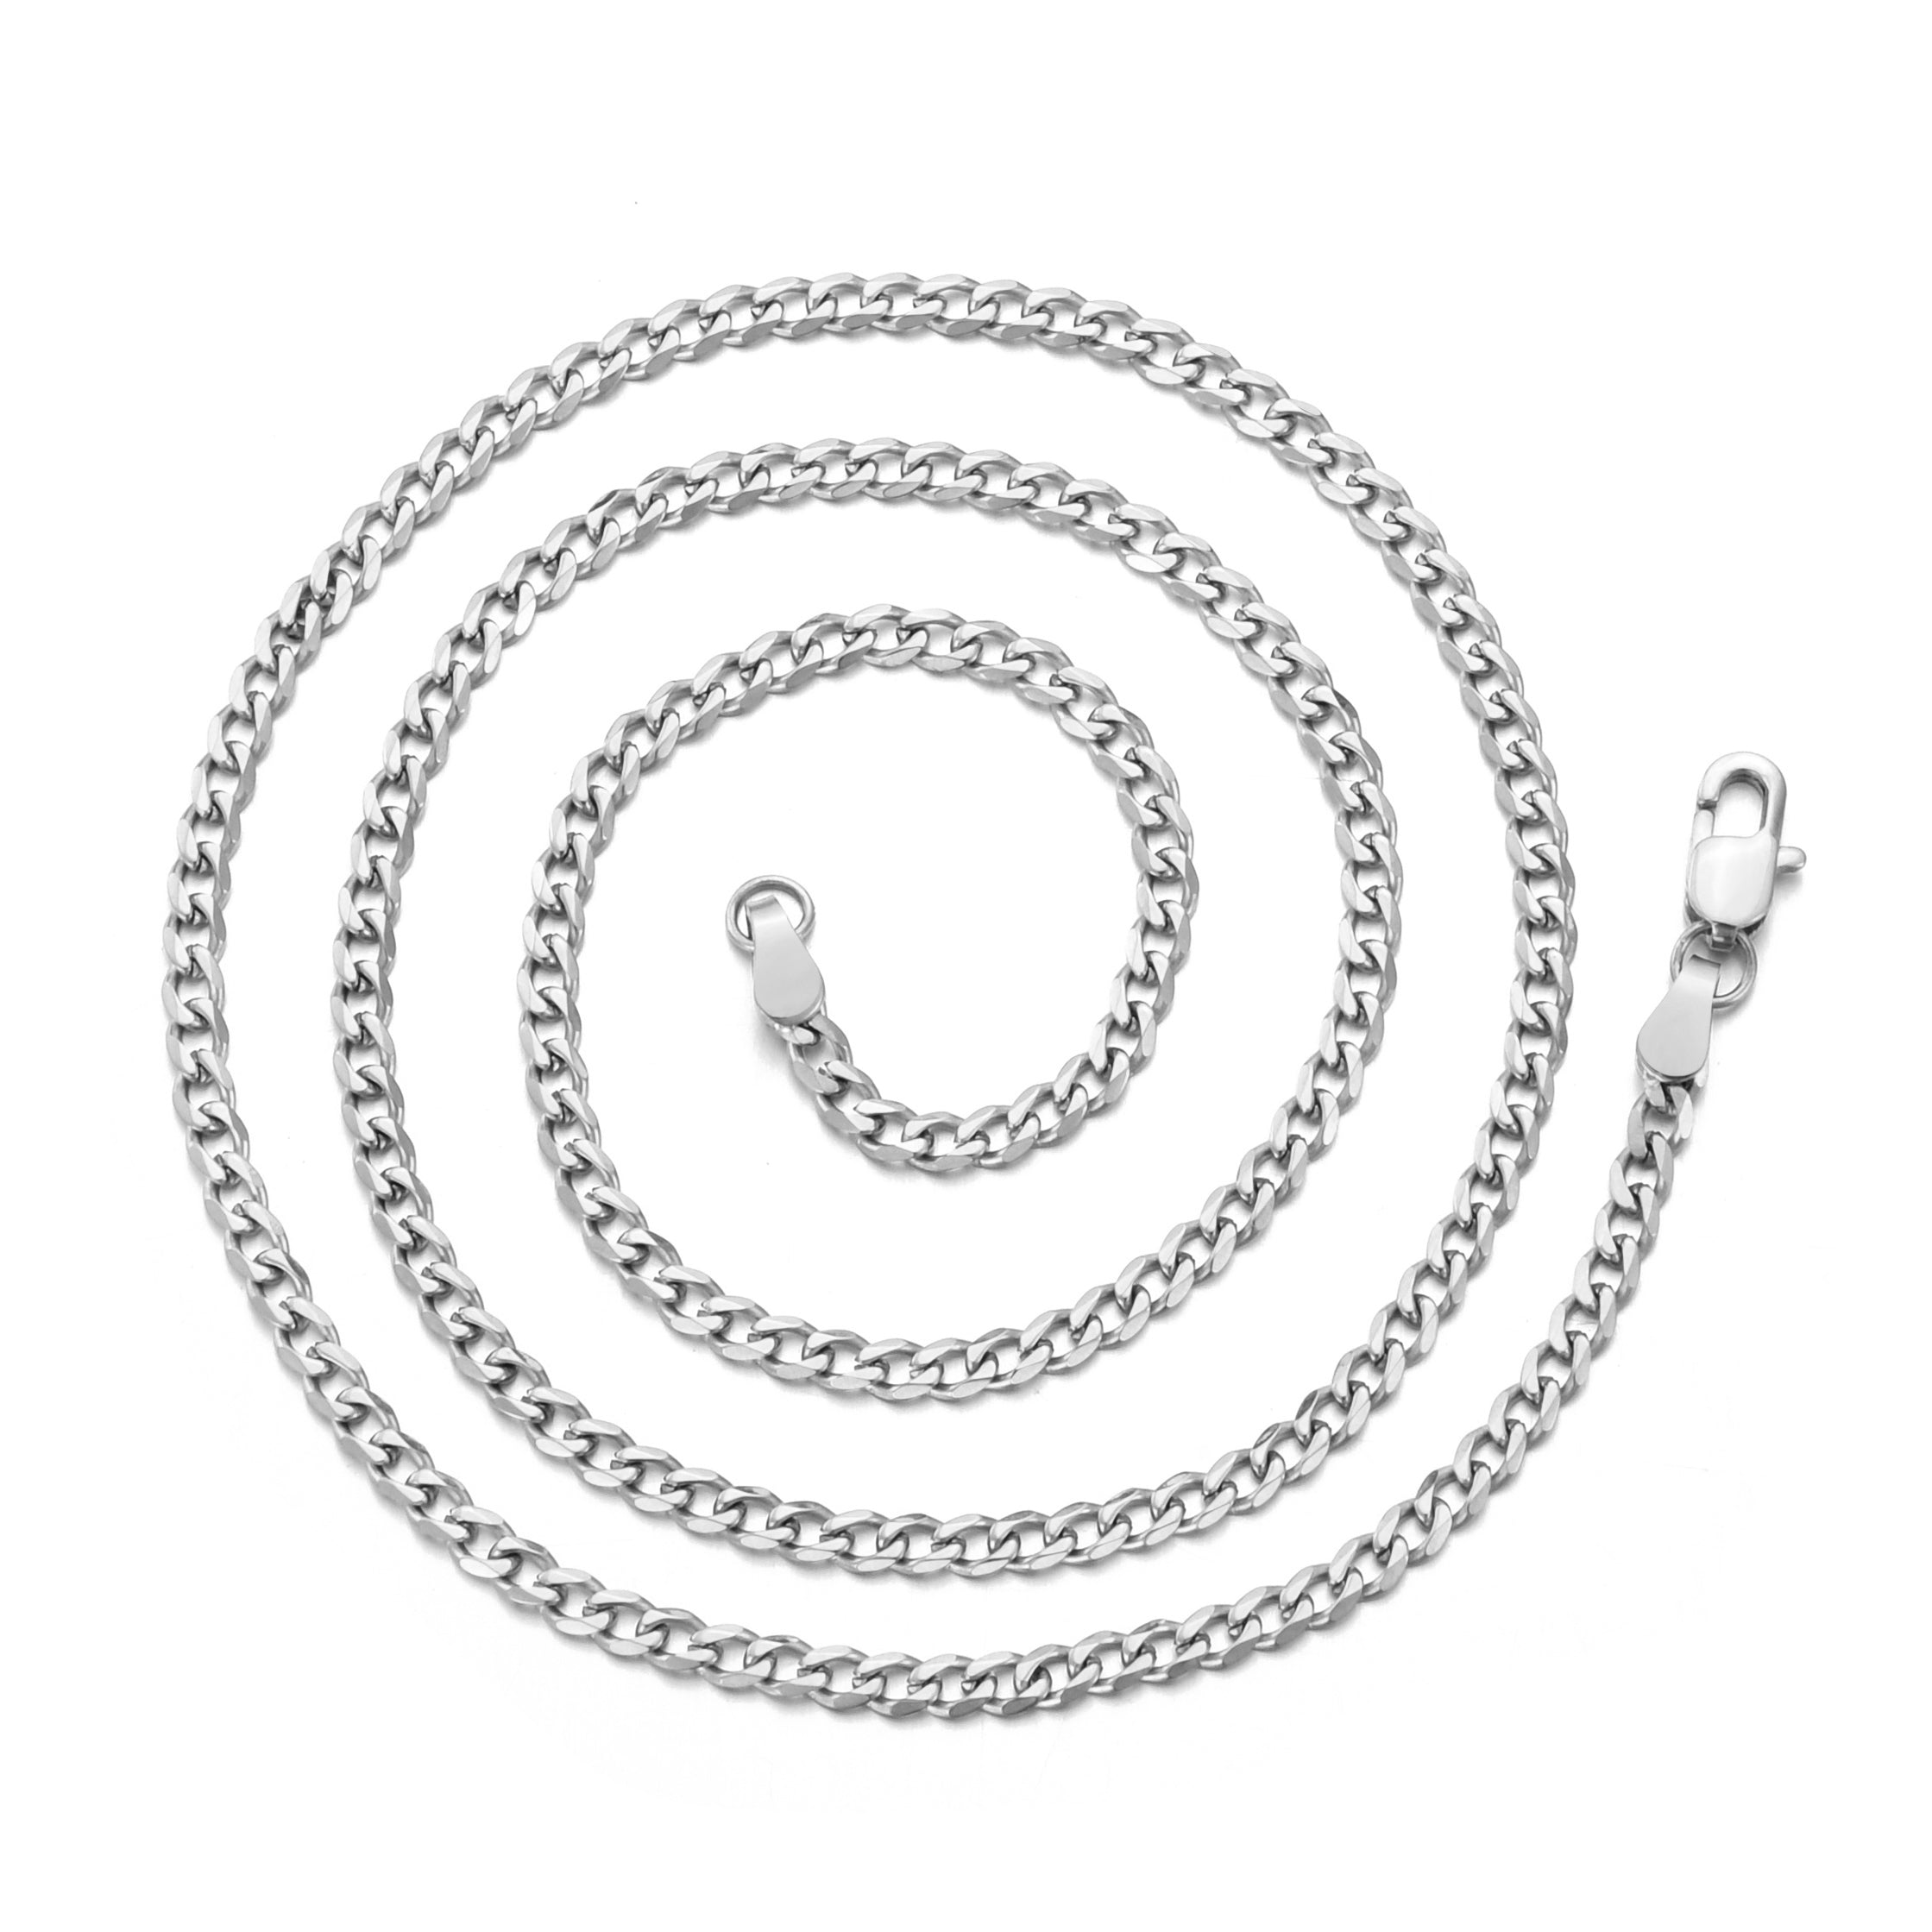 Men's 3mm Stainless Steel 18-24 Inch Curb Chain Necklace